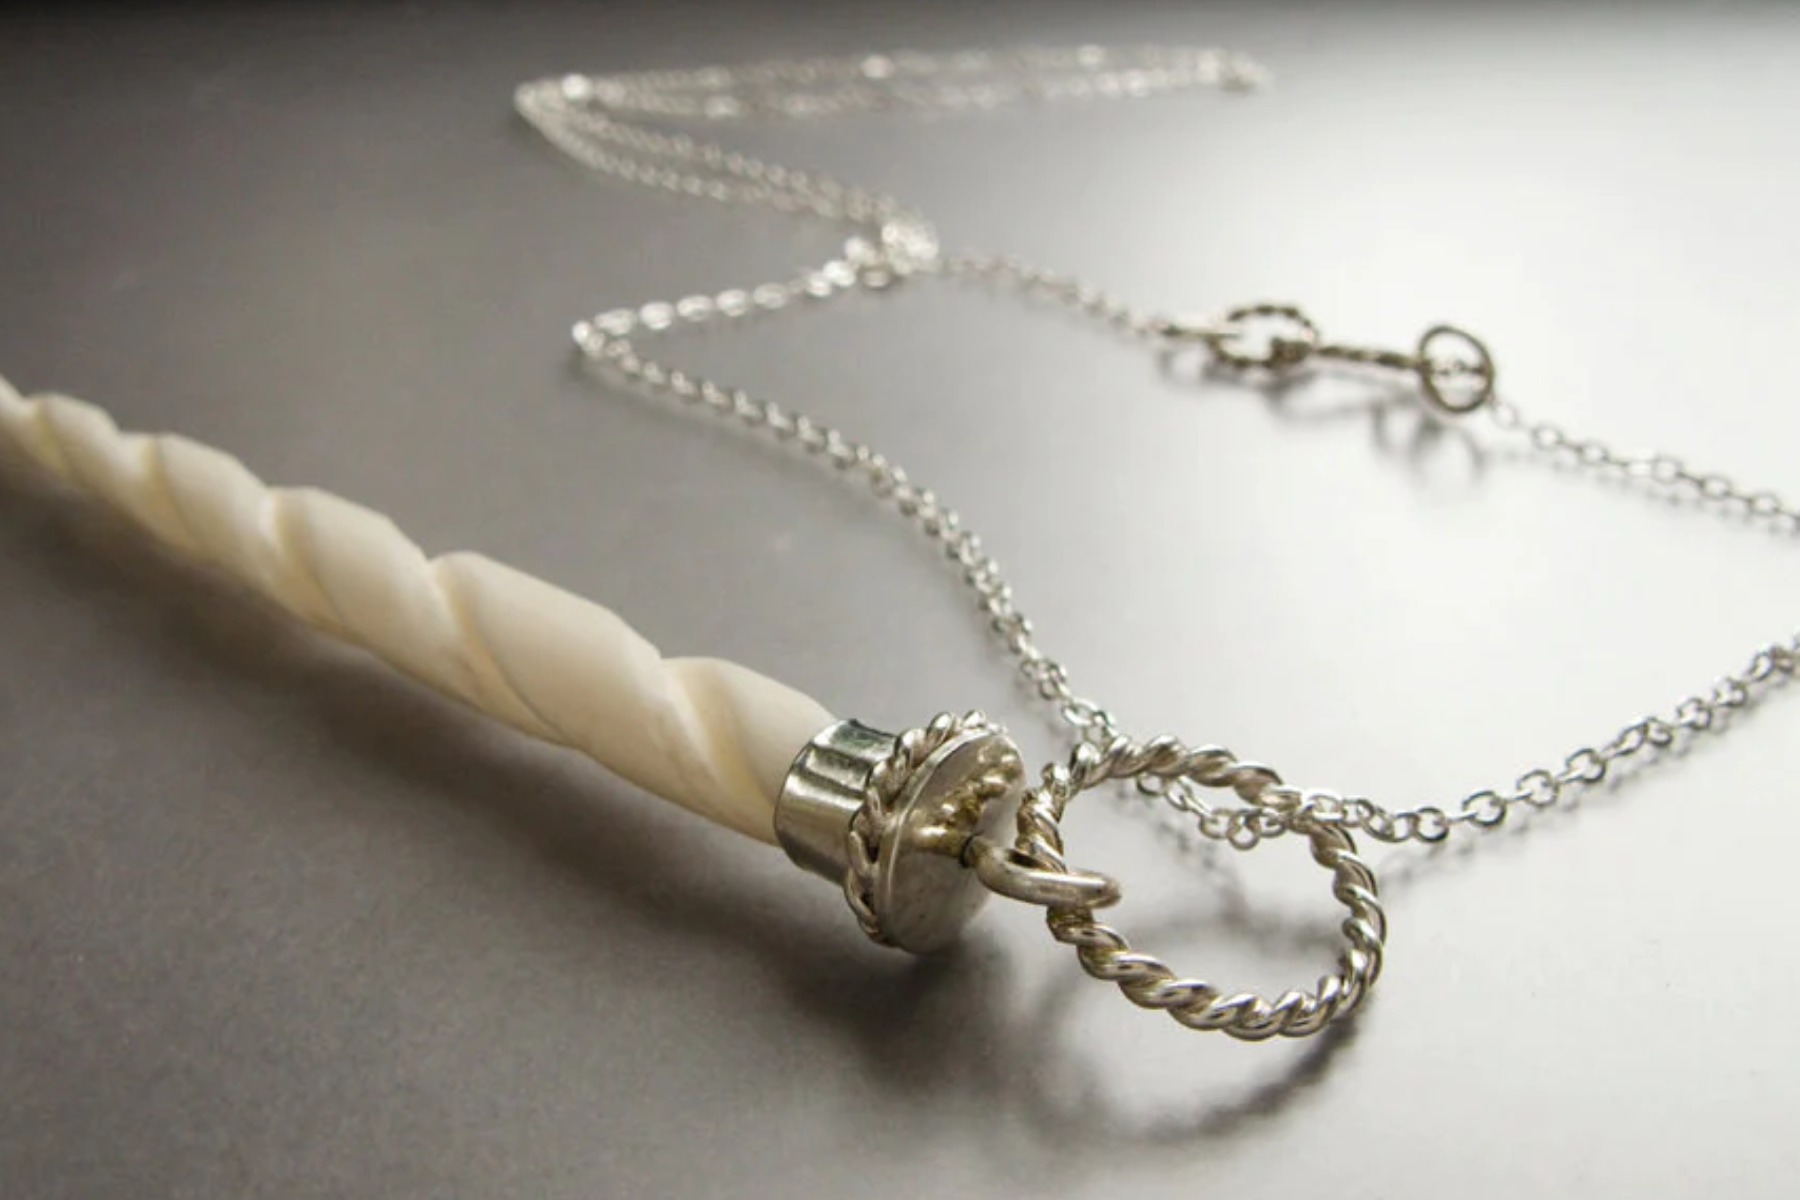 A necklace with a white unicorn horn